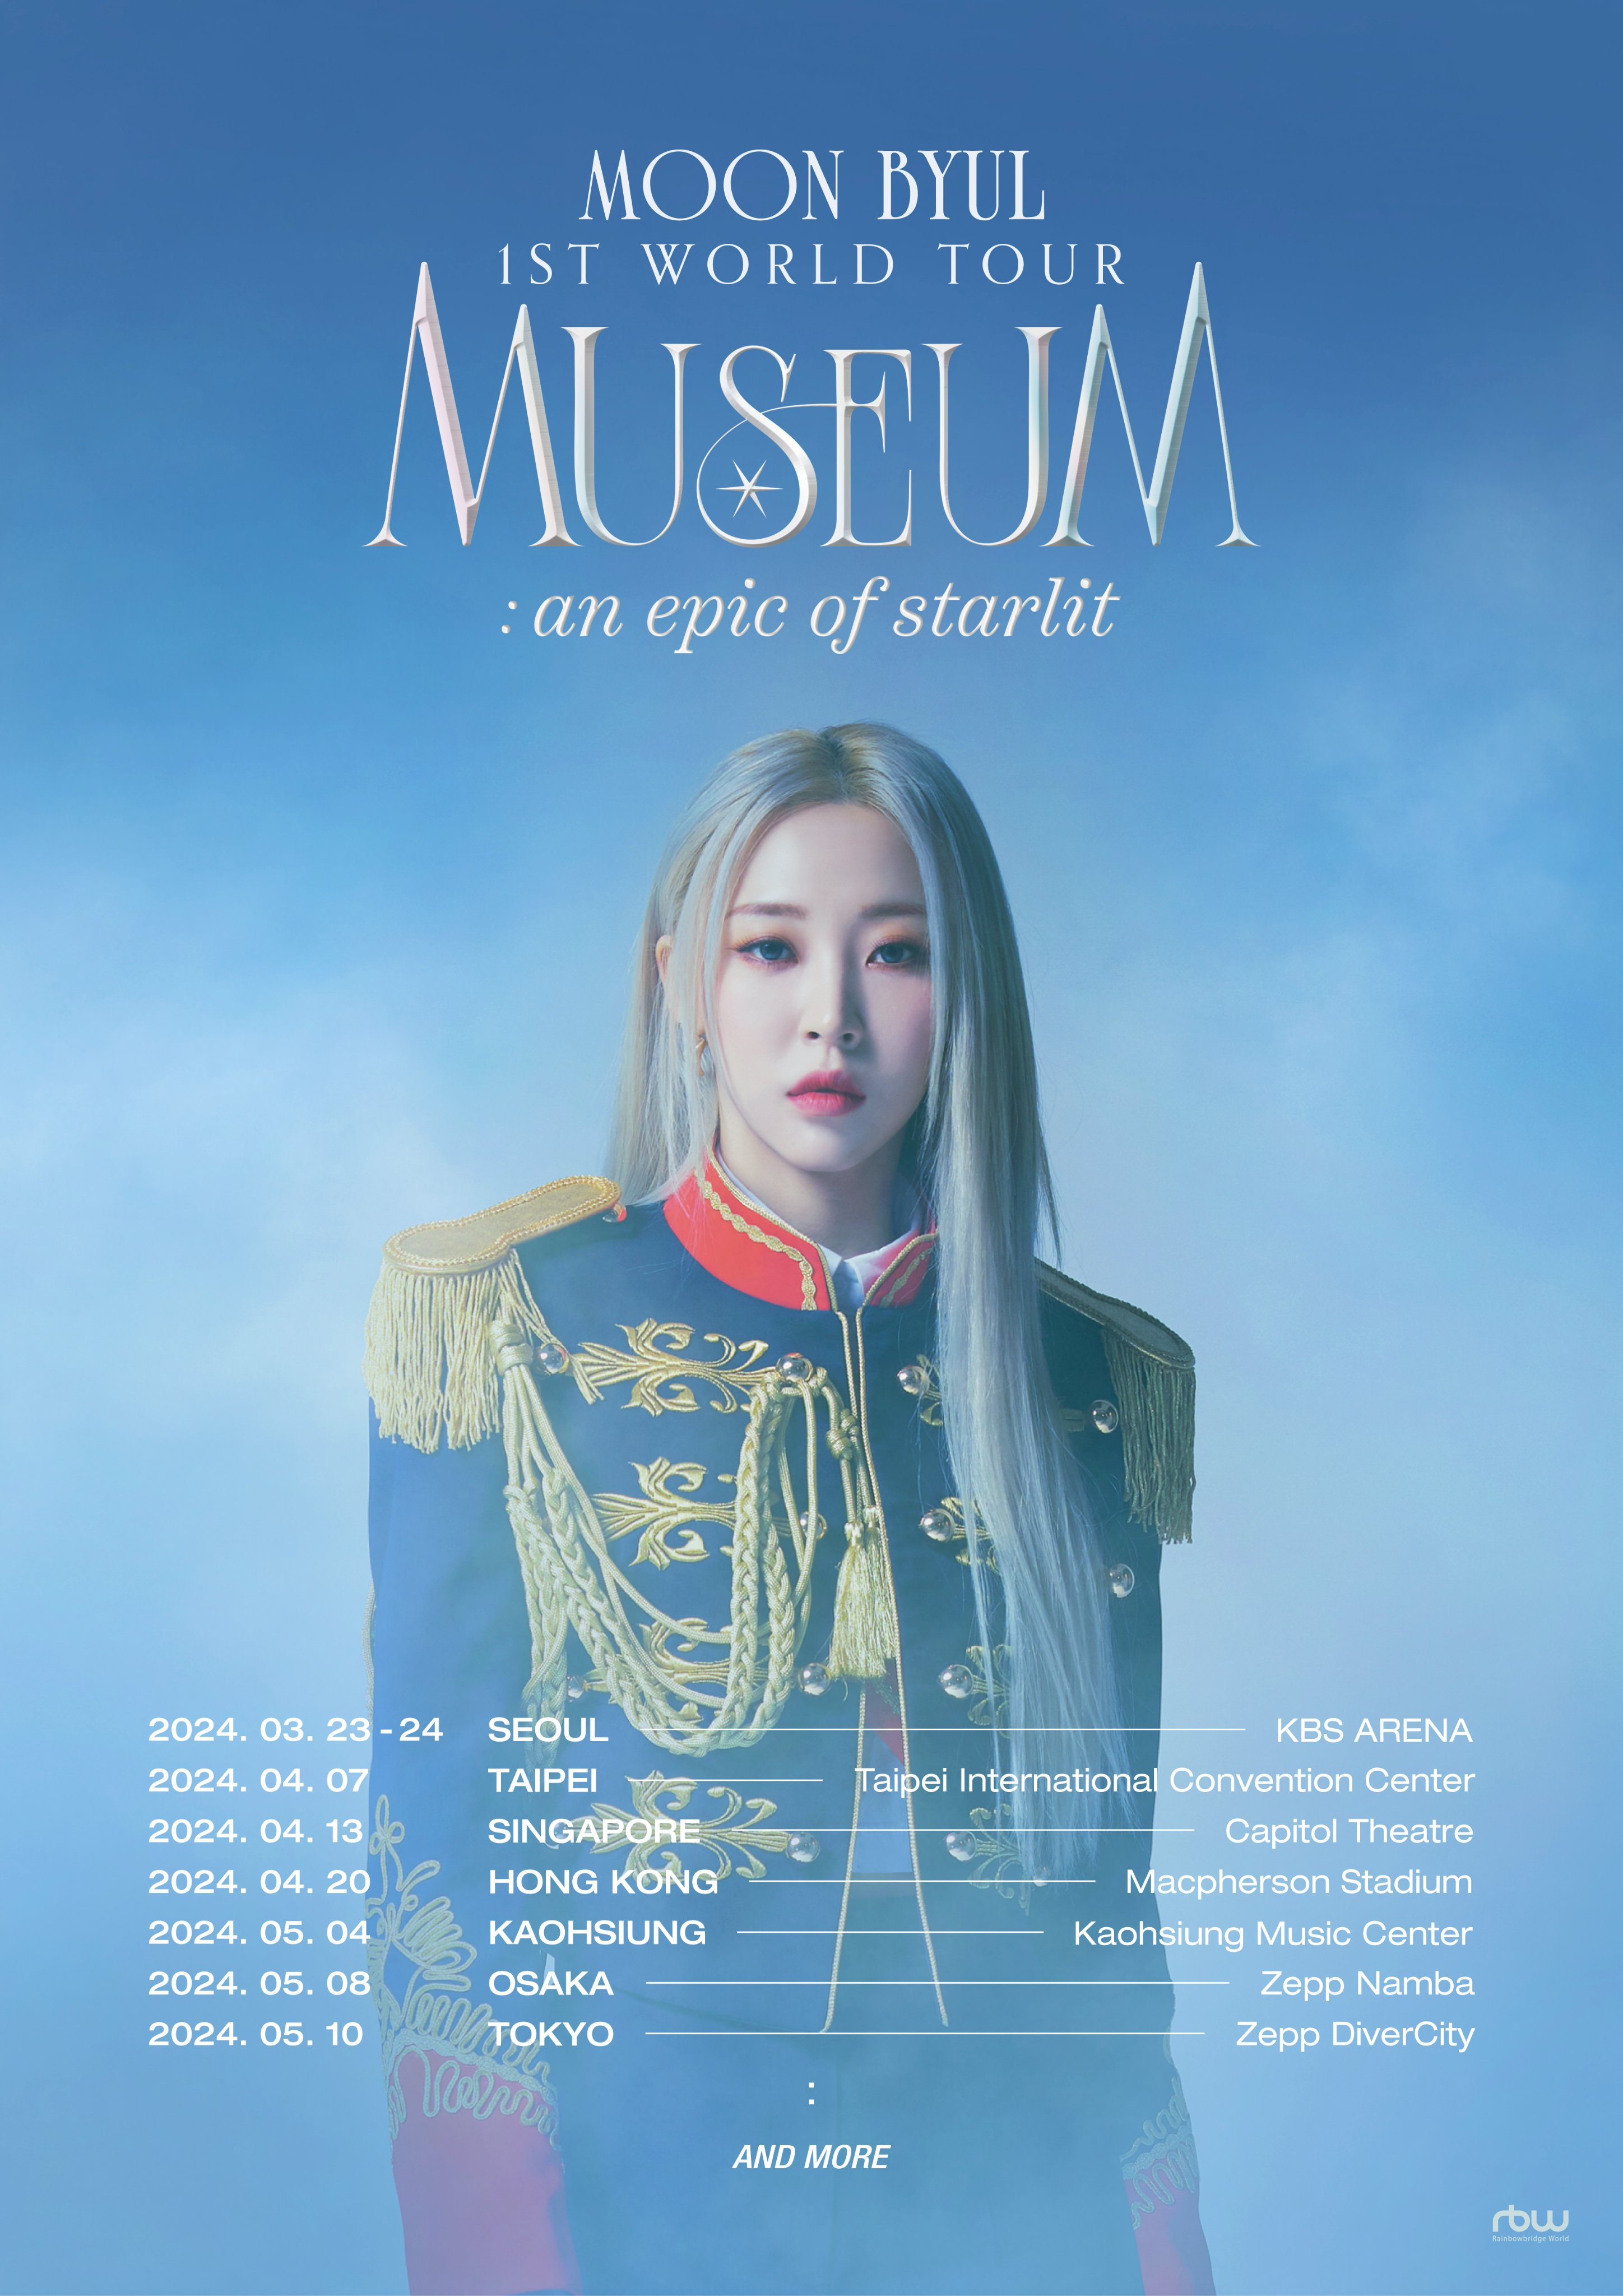 MAMAMOO’s Moonbyul Announces Dates And Cities For 1st World Tour “MUSEUM : An Epic Of Starlit”